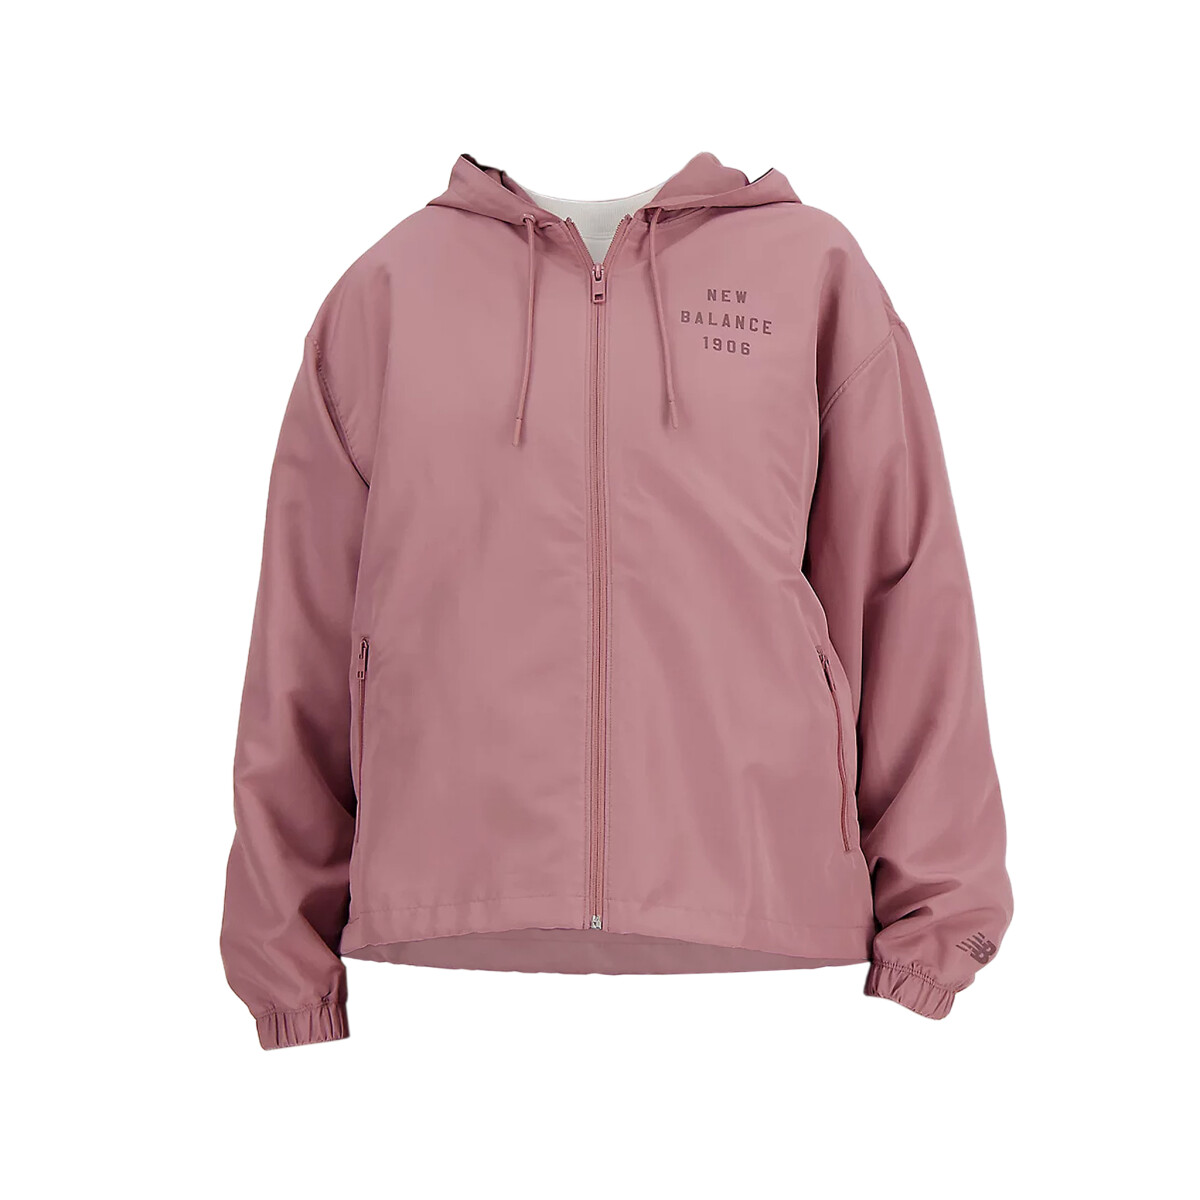 CAMPERA NEW BALANCE ICONIC COLLEGIATE WOVEN - PINK 